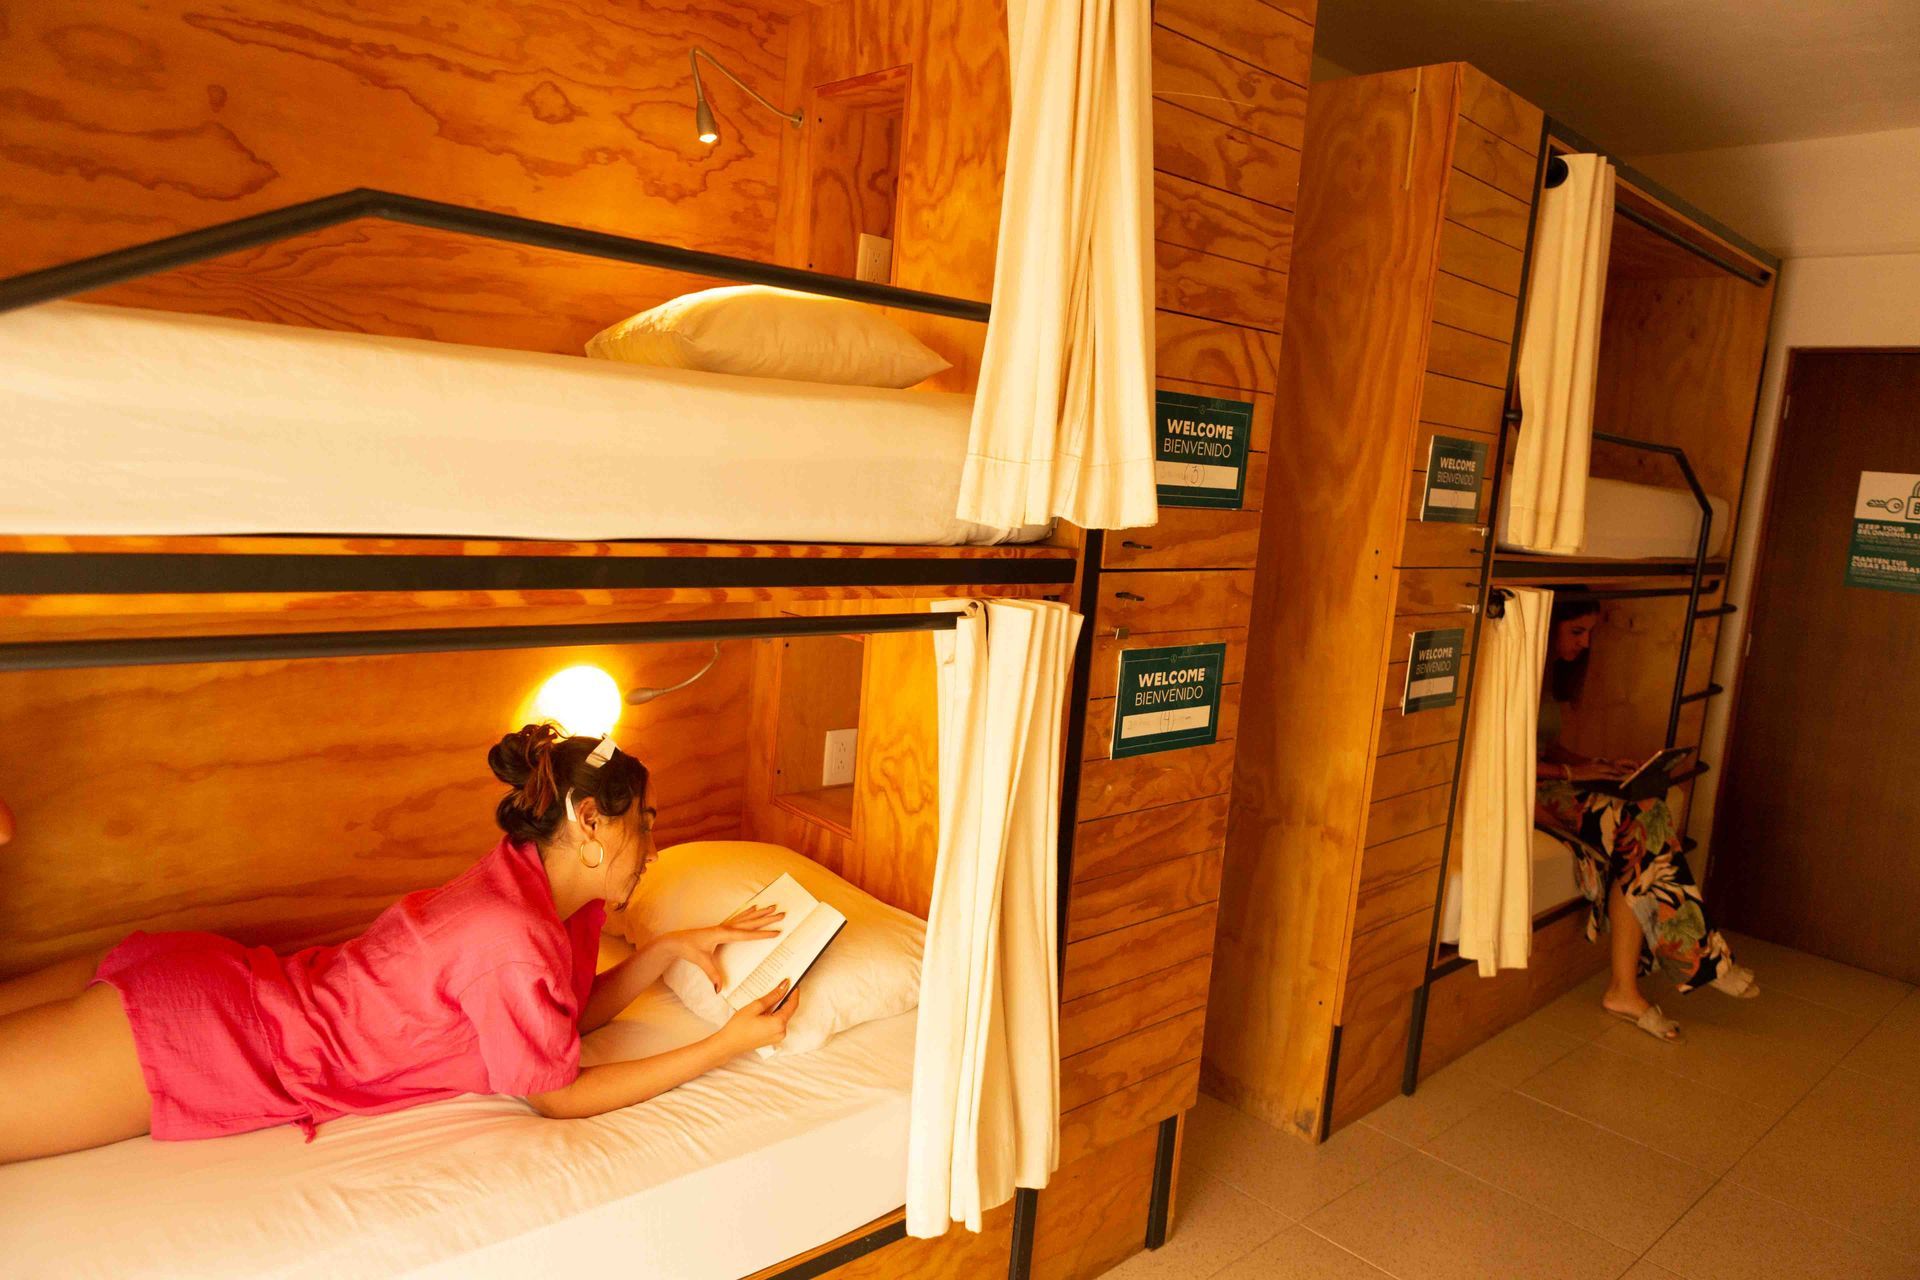 A woman is laying on a bunk bed reading a book.